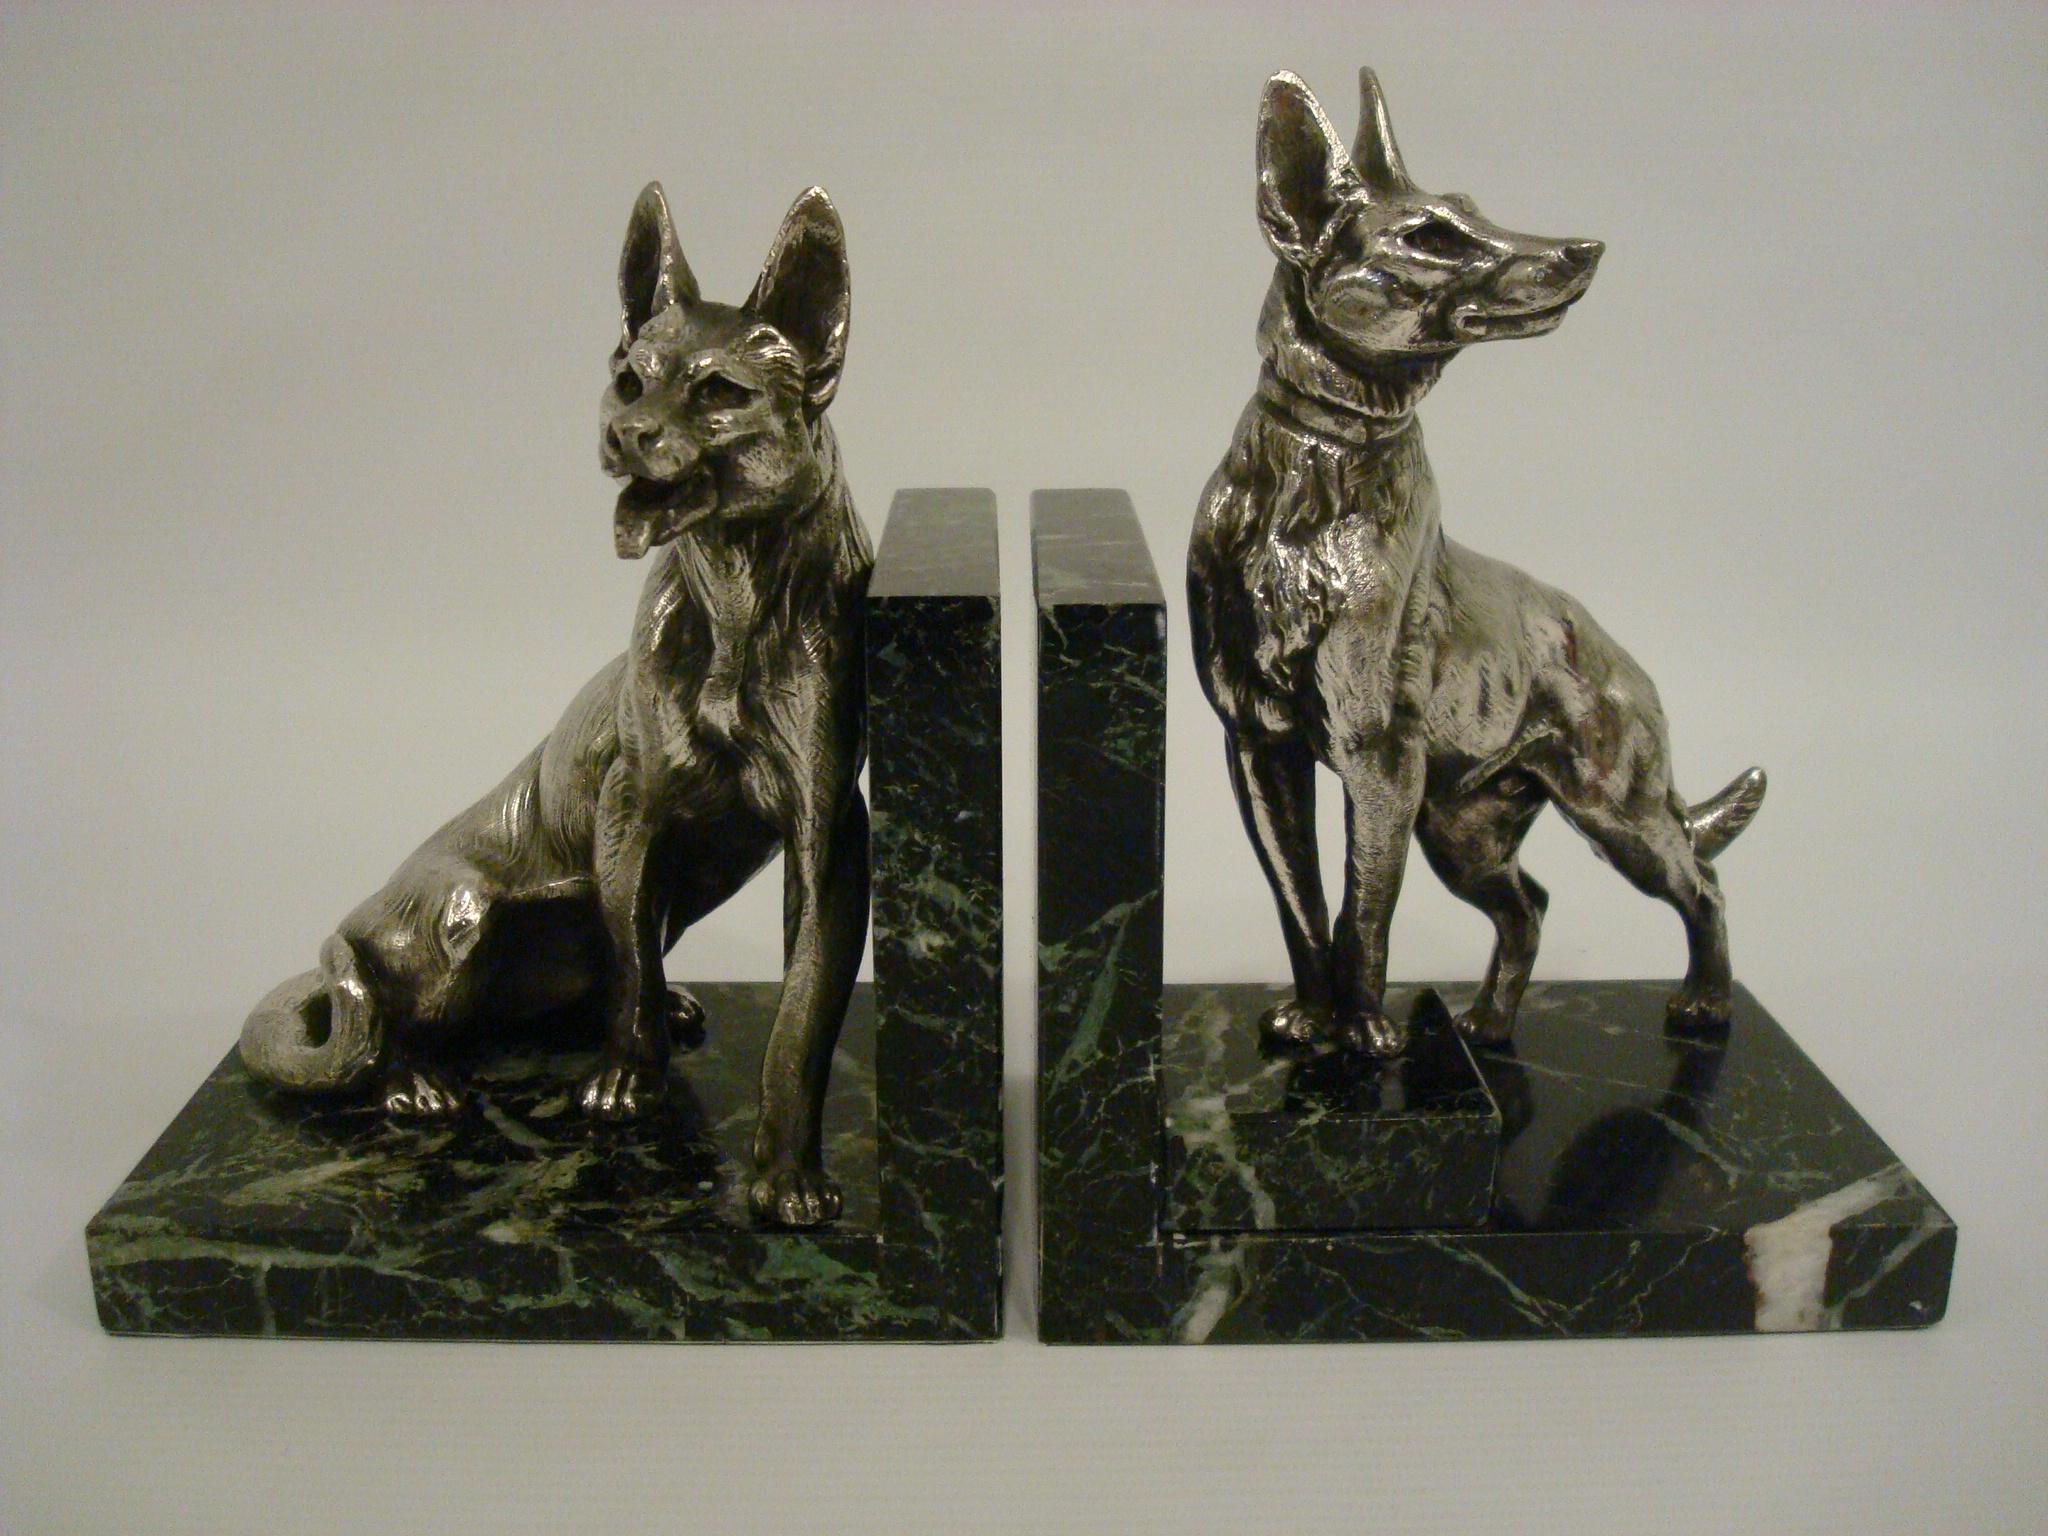 German Shepherd dog sculpture bookends by Louis-Albert Carvin.
Dog Animalier Art Deco Sculpture Bookends in Marble and Silvered Metal. Pair of large Silvered Metal Sculptures of two German shepherds mounted on marble bases
Born in Paris in 1875